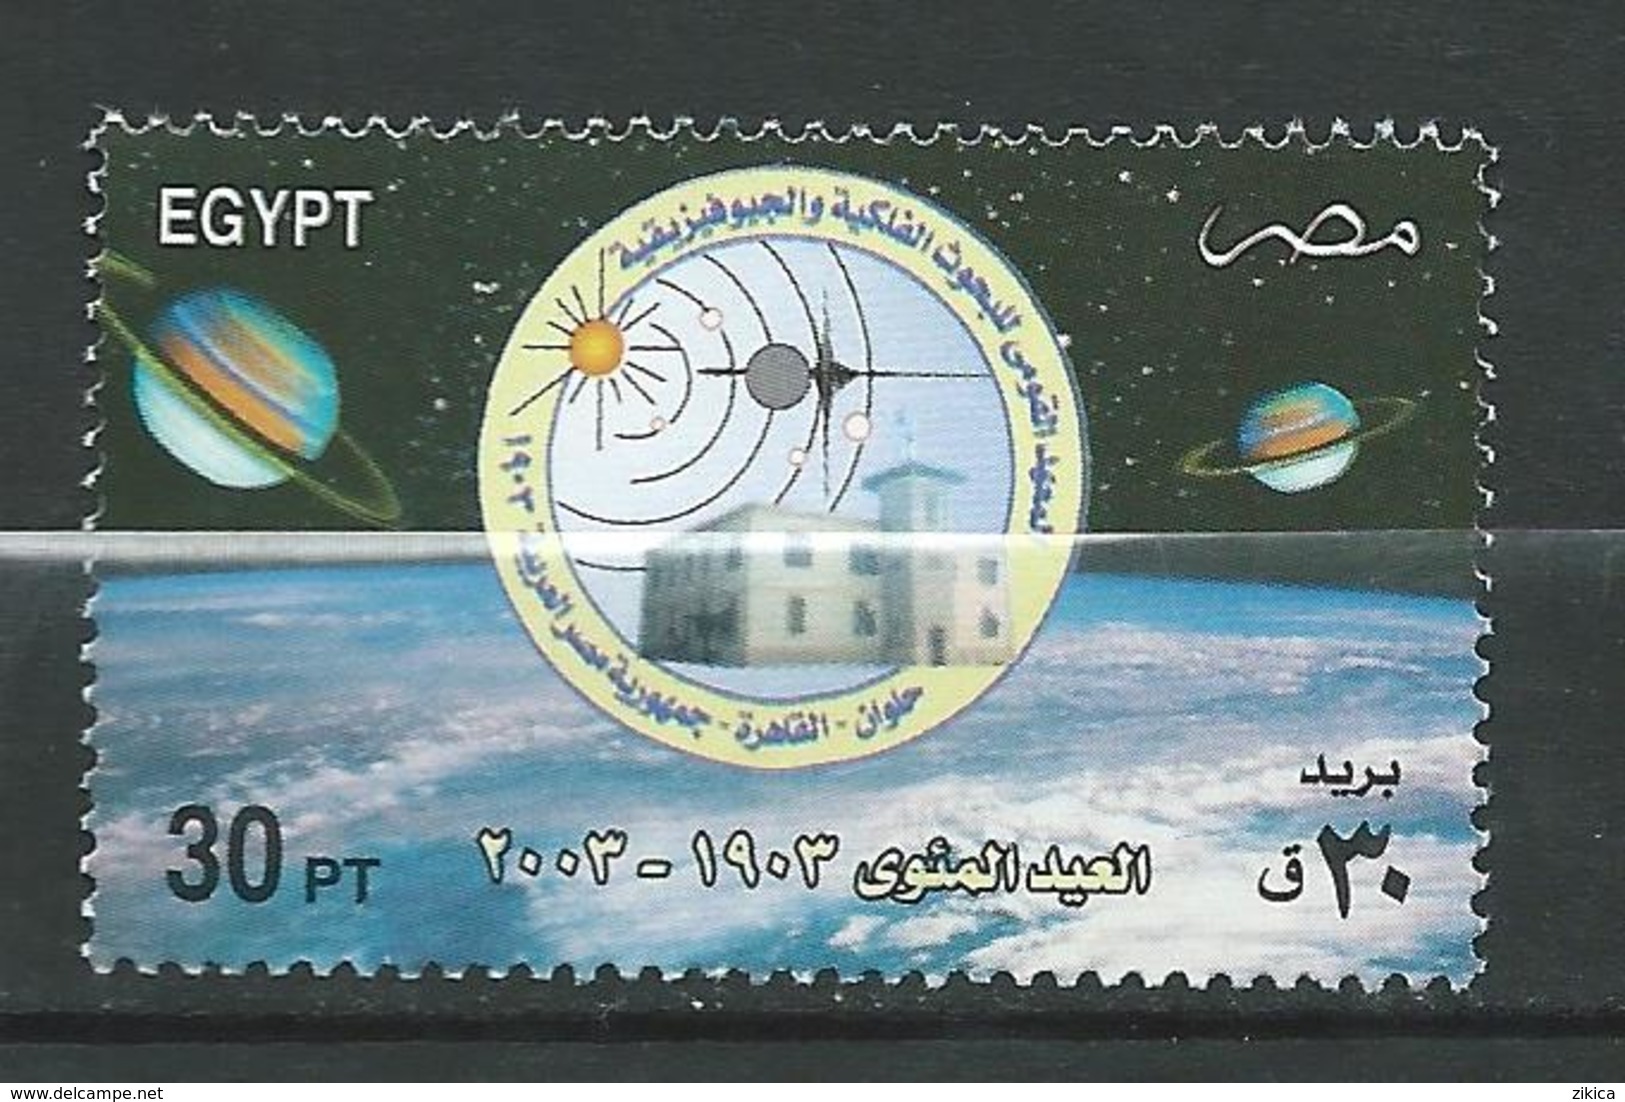 Egypt 2003 The 100th Anniversary Of National Institute For Astrological And Geophysical Research.Space.Astronomy. MNH - Unused Stamps